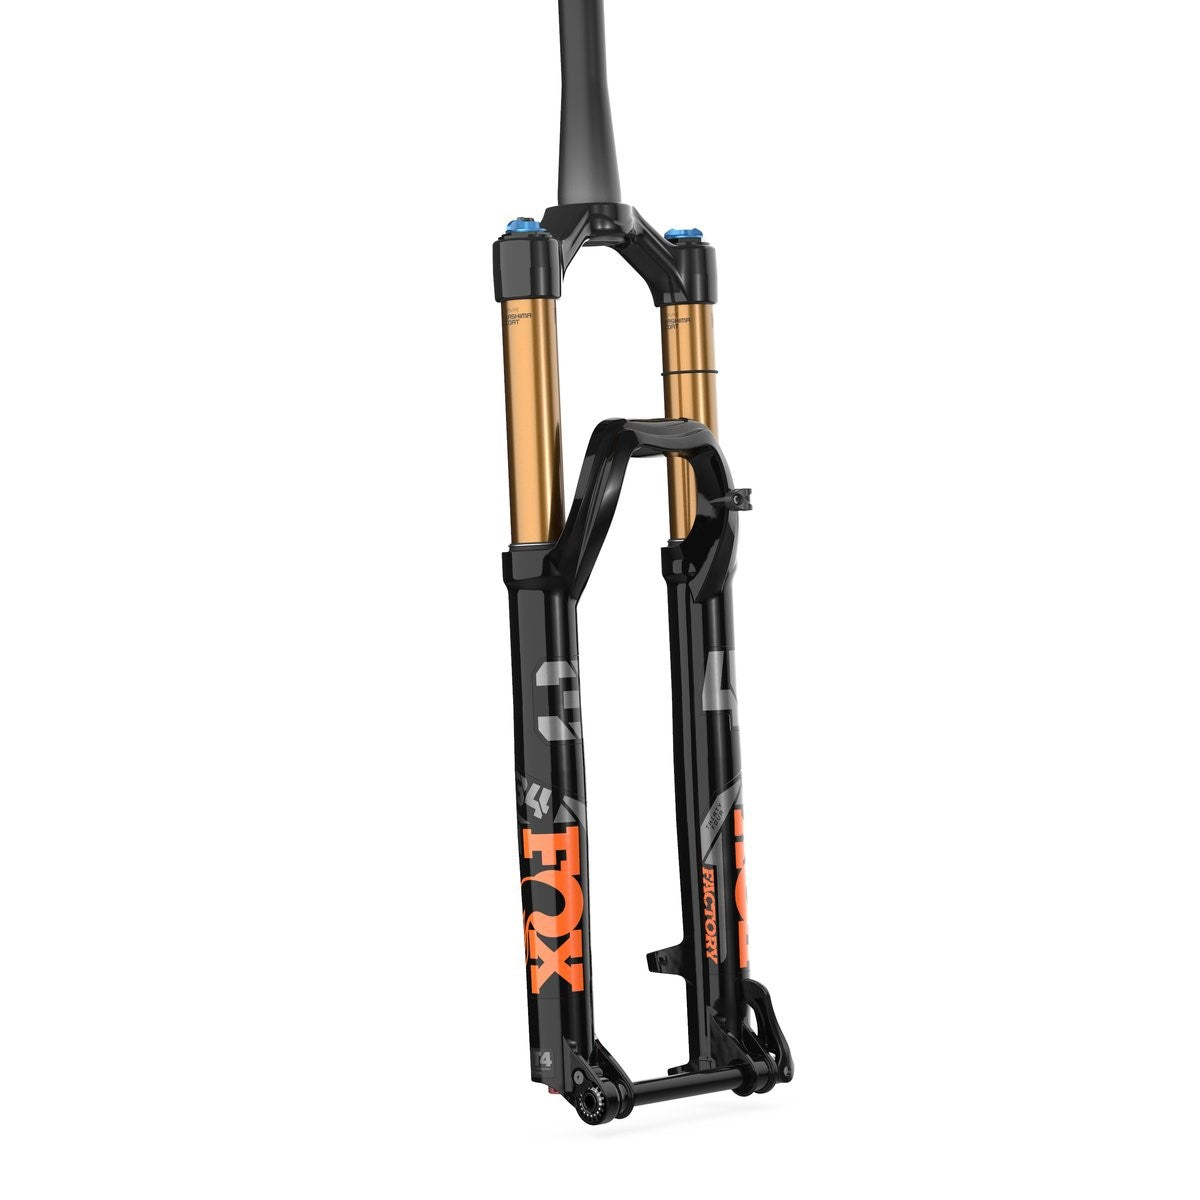 Fox 34 Float Factory Kashima Fork - 27.5 Inch - 1 1/8th - 1.5 Inch Tapered - 15x110mm Boost - 140mm Travel - 44mm - FIT4 3 Pos Adj - Gloss Black